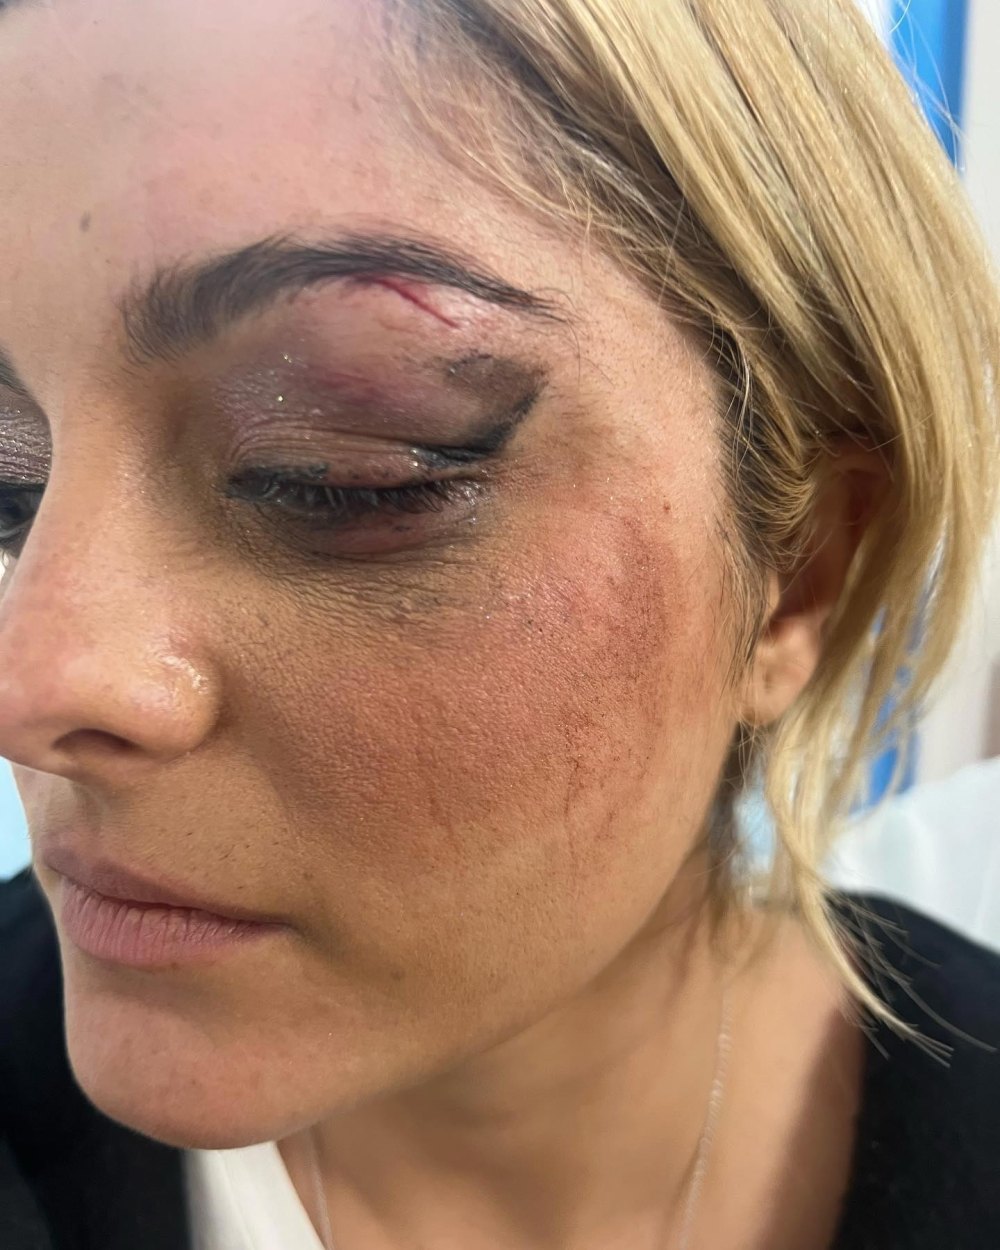 Bebe Rexha Shares Black Eye Photos After Fan Throws Phone at Her Face 2